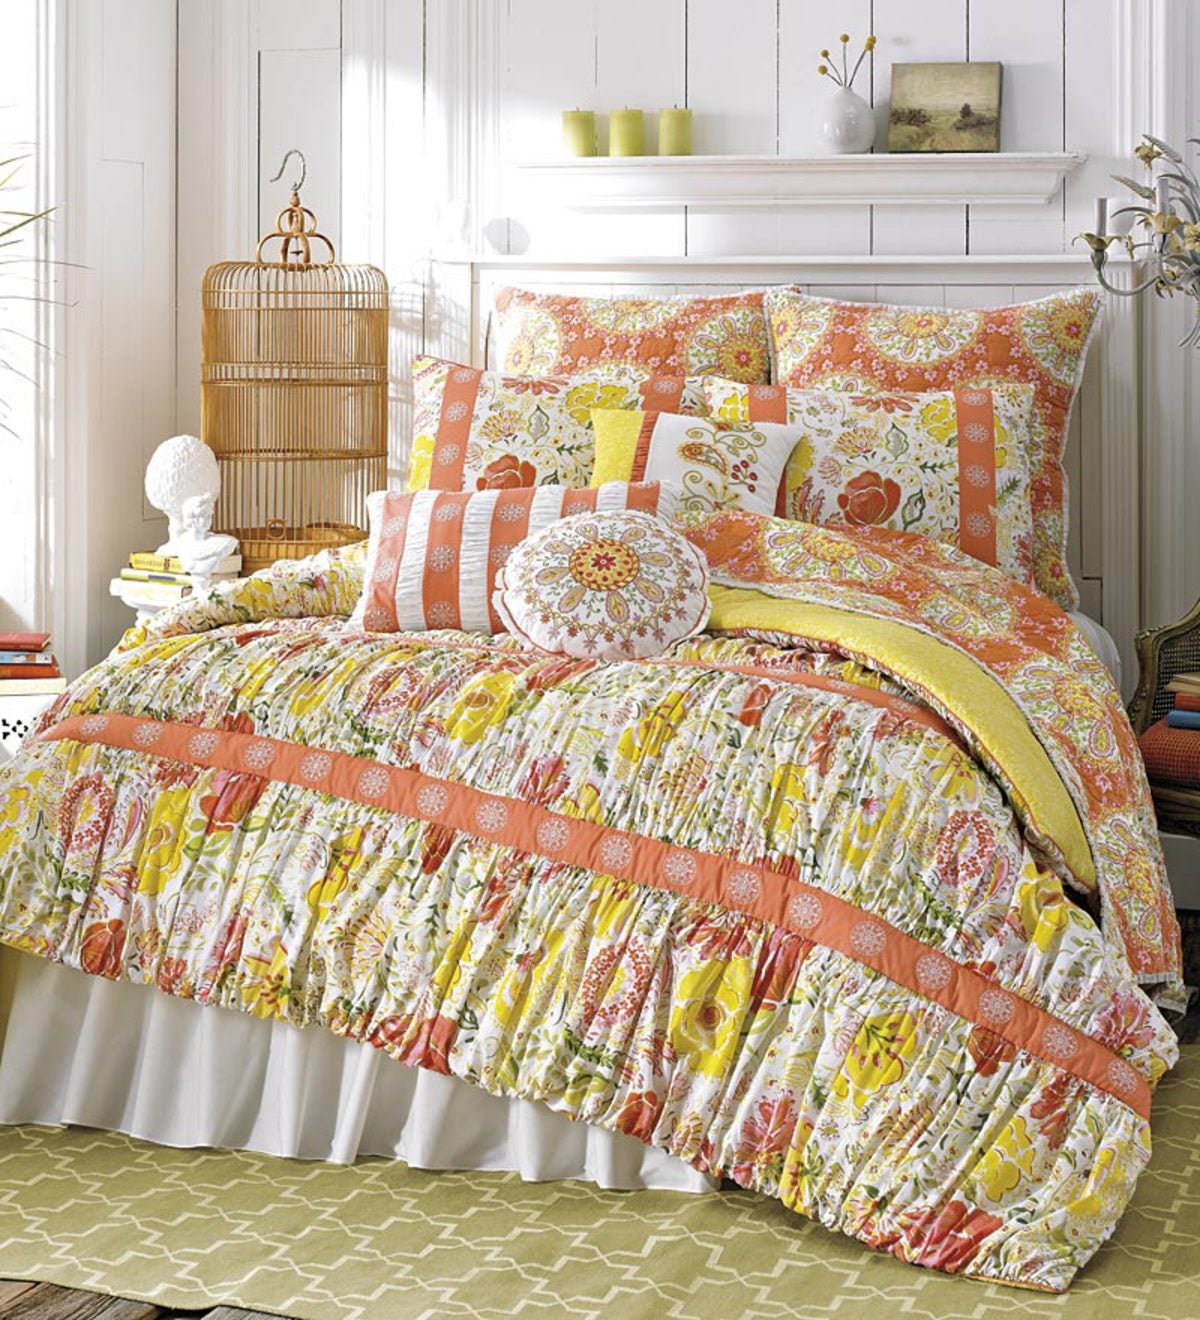 Meadow Cotton Reversible Print Twin Quilt | Plow & Hearth